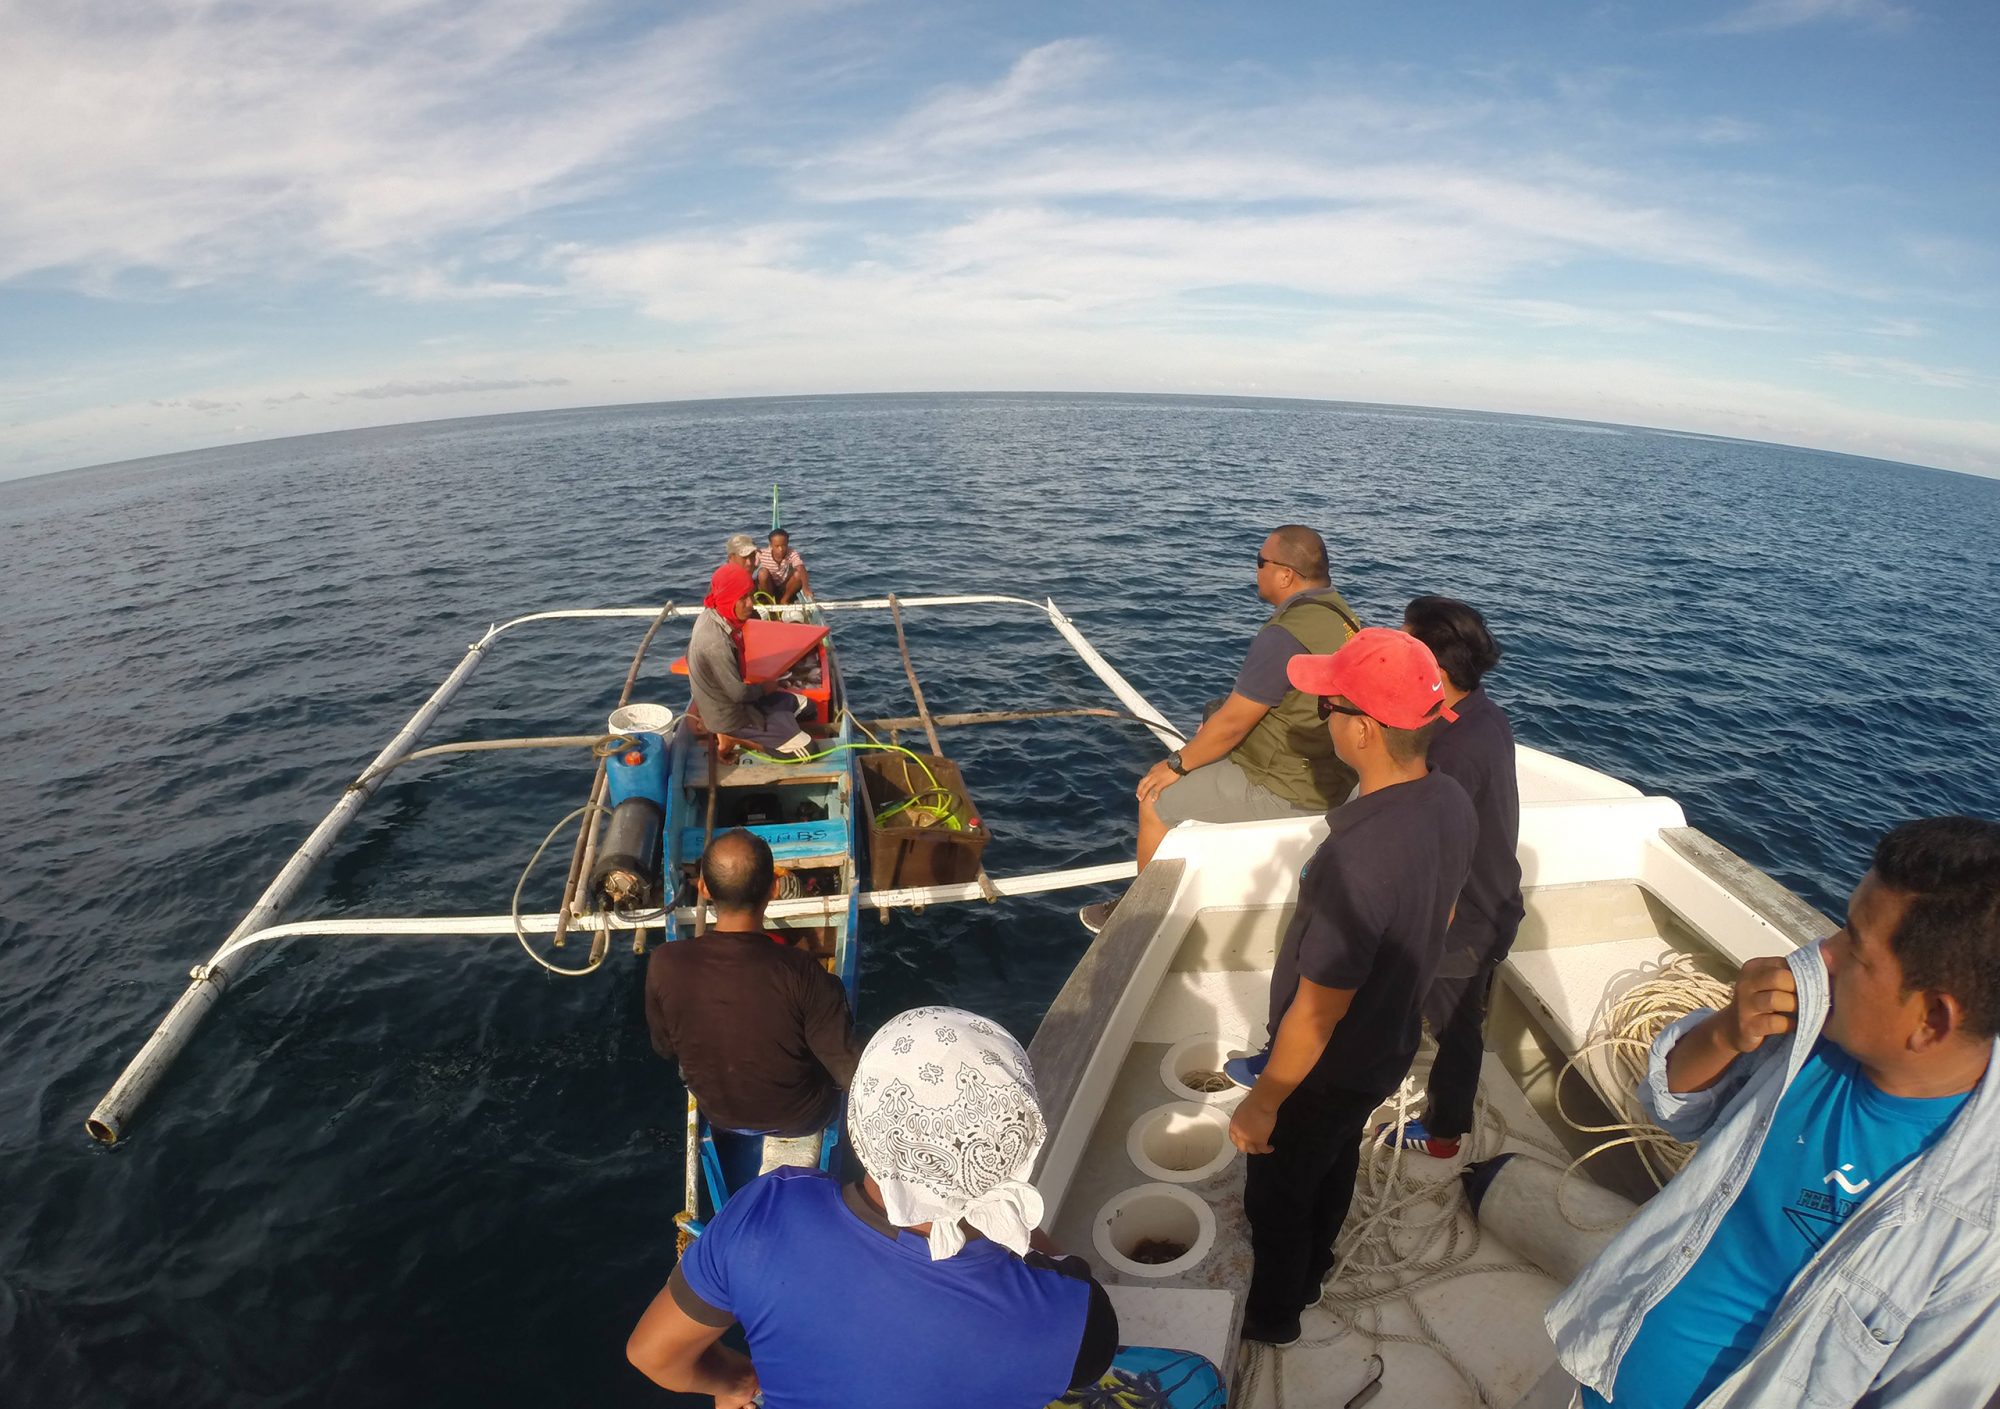 A Reef Guardian patrol checks on a boat suspected of fish-bombing in the Sugud Islands marine conservation area 